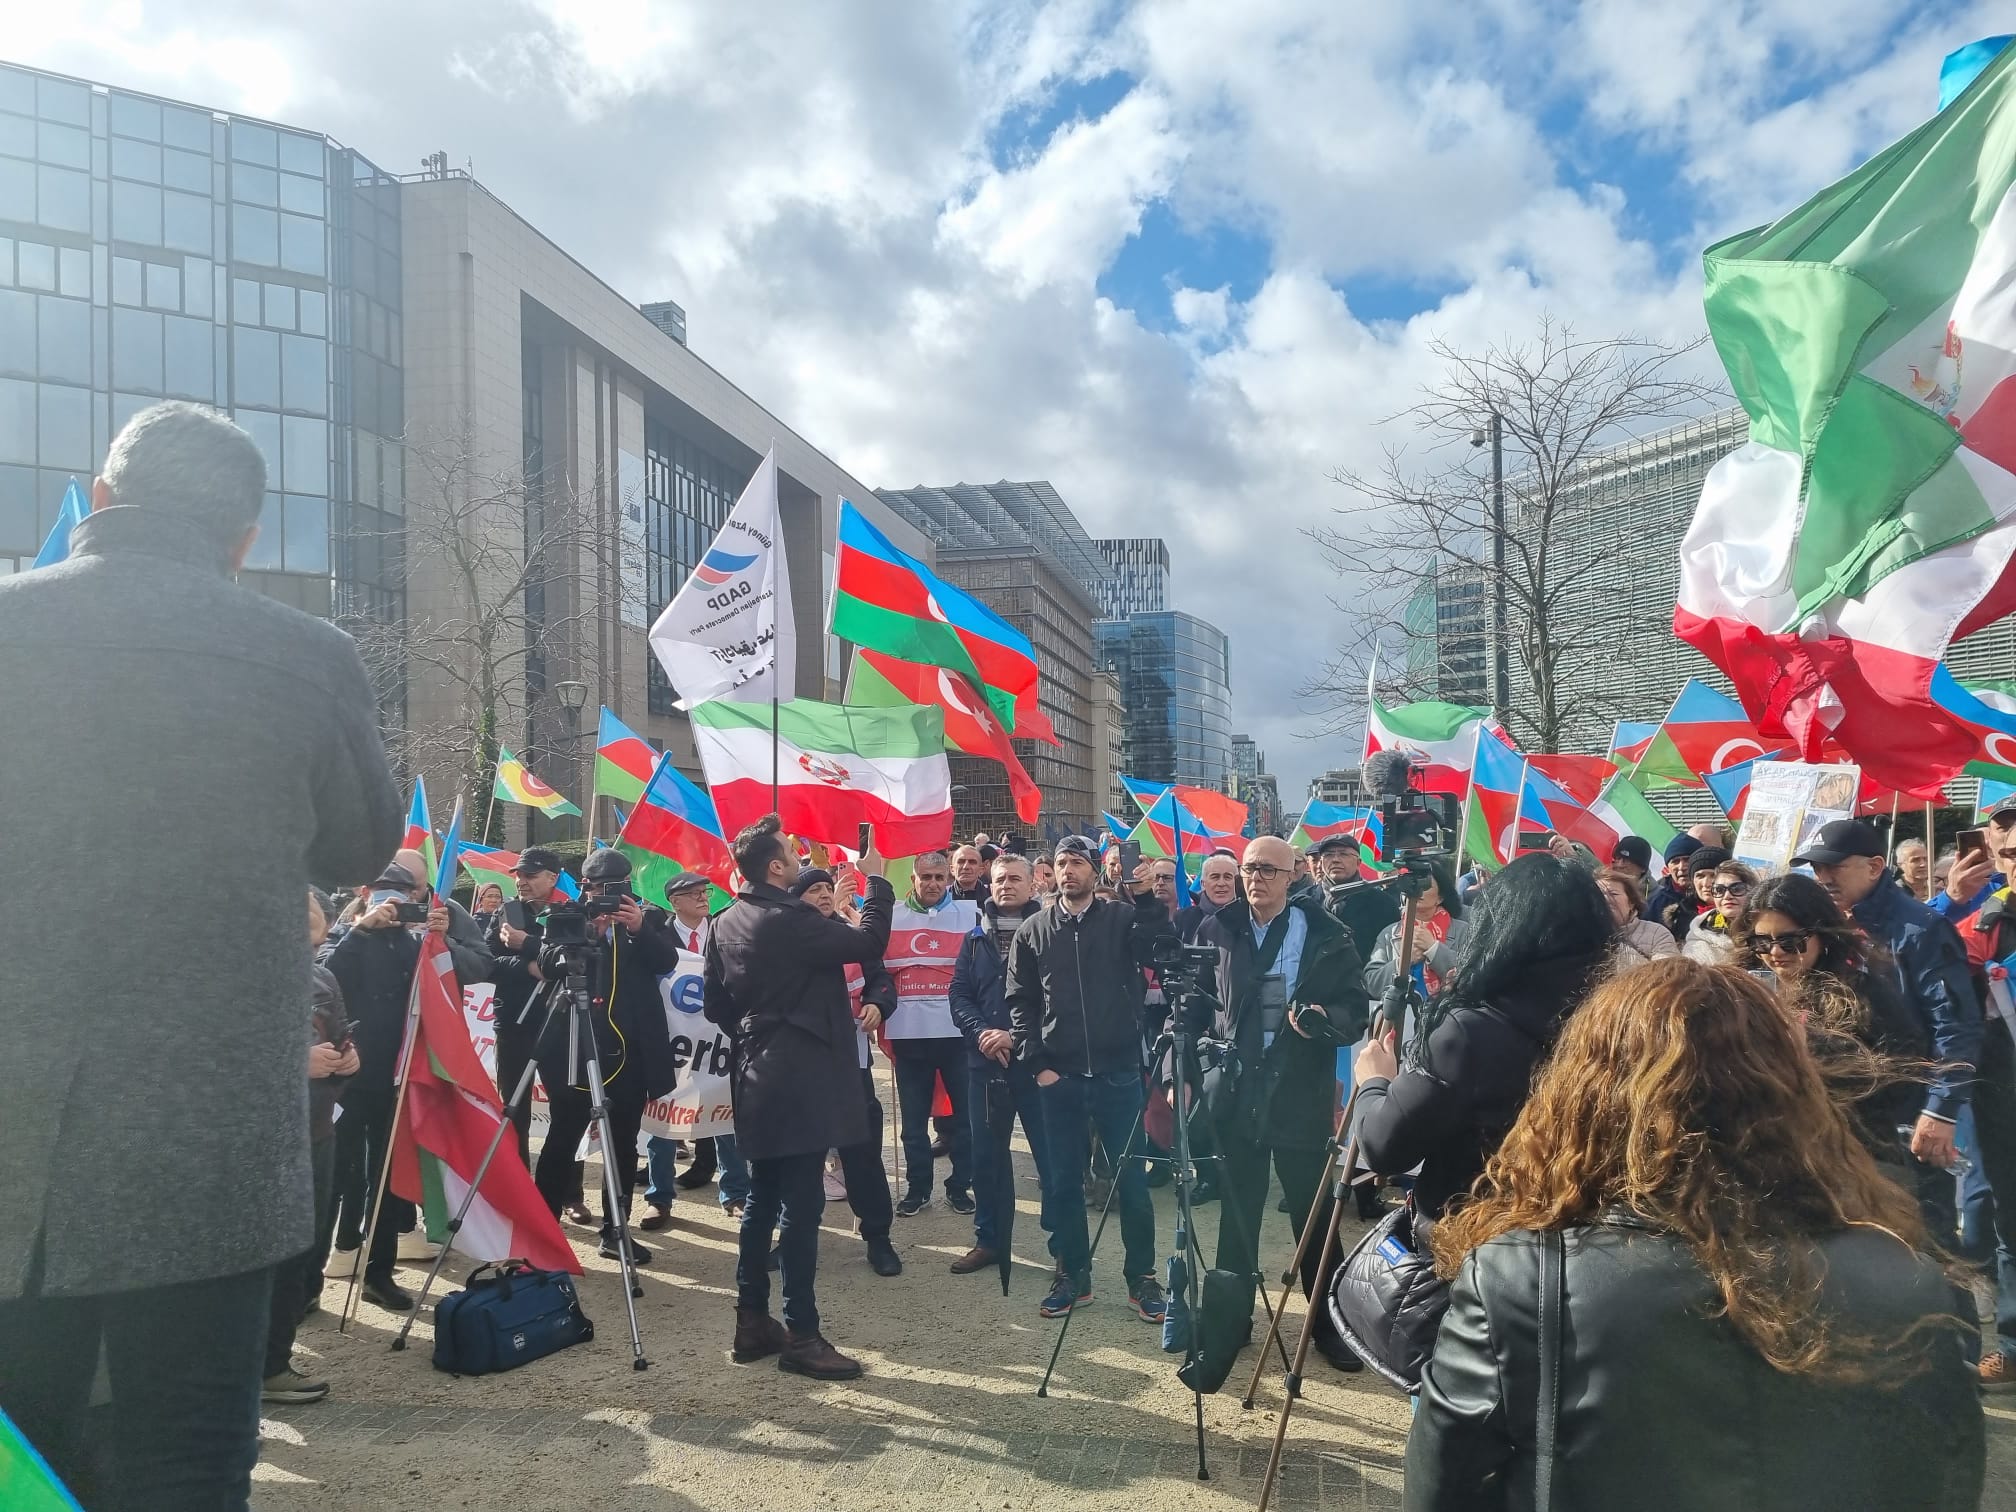 On March 25th Protestors from the Azeri community in iran gathered in front of the European Parliament and in front of the EU institutions to show their support to the Iranian revolution as well as the Ukrainian diaspora